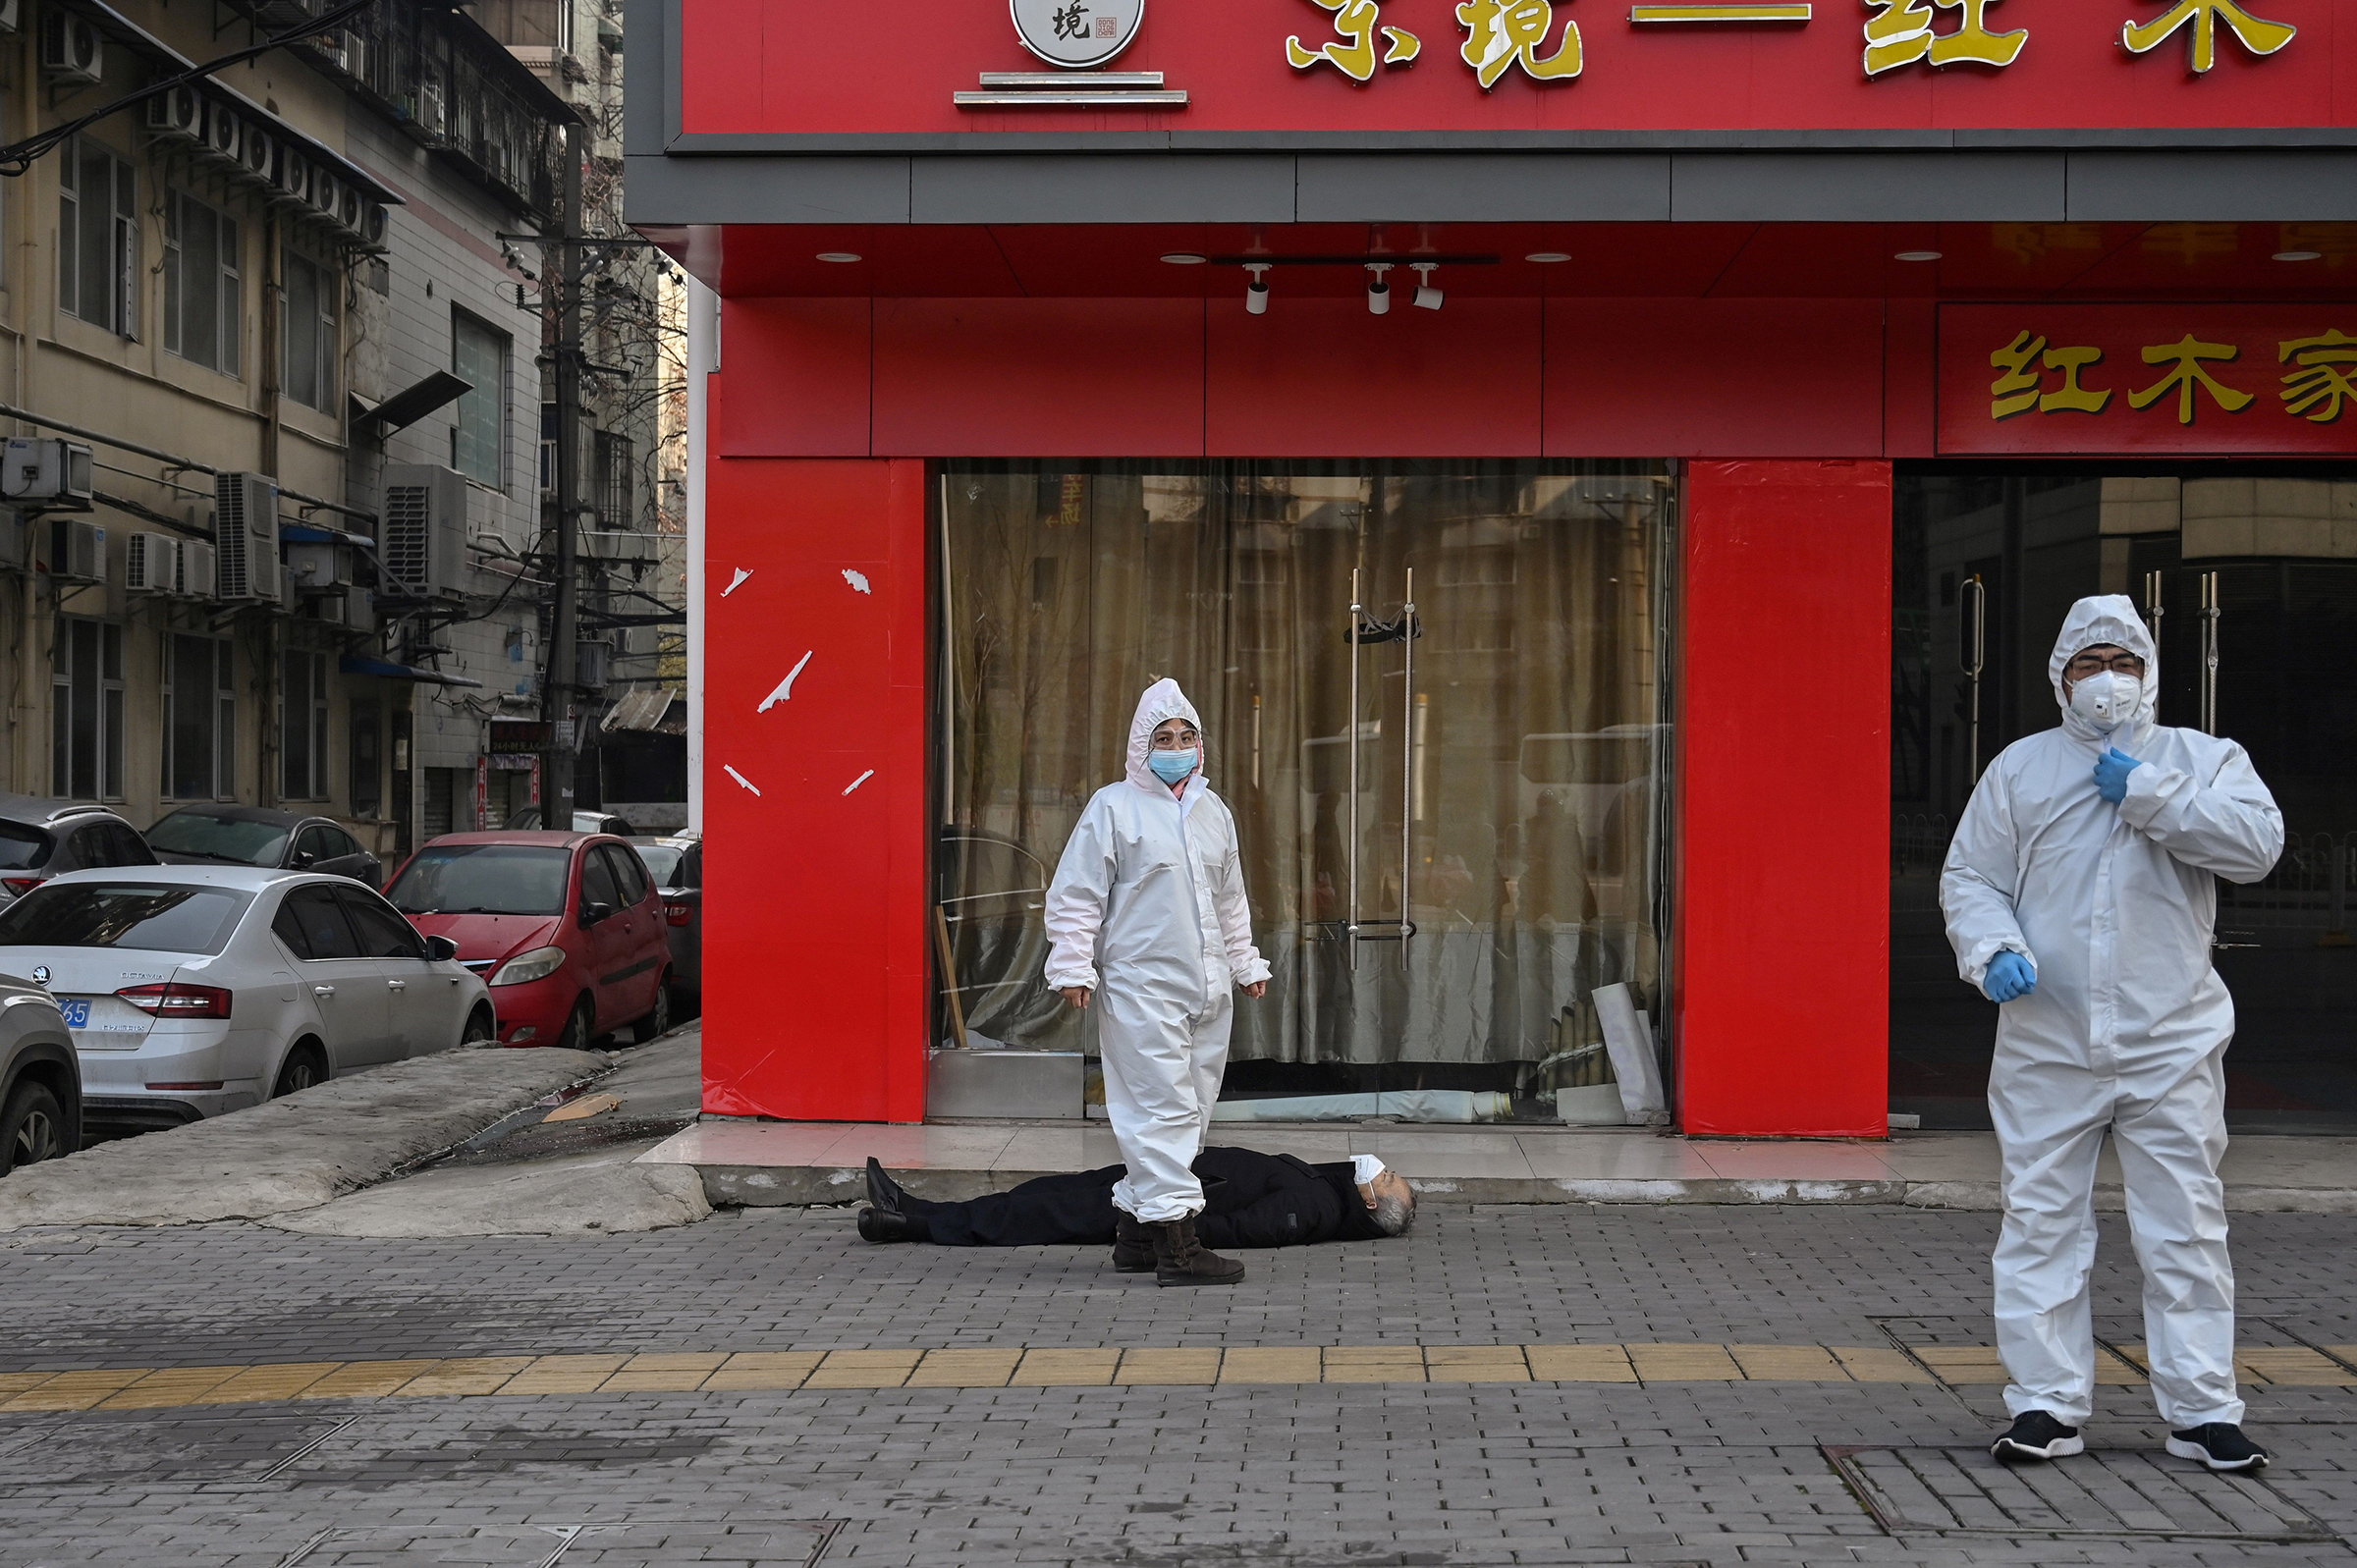 Officials in protective suits near an elderly man who collapsed and died near a hospital in Wuhan, China, on Jan. 30. (Hector Retamal—AFP/Getty Images)